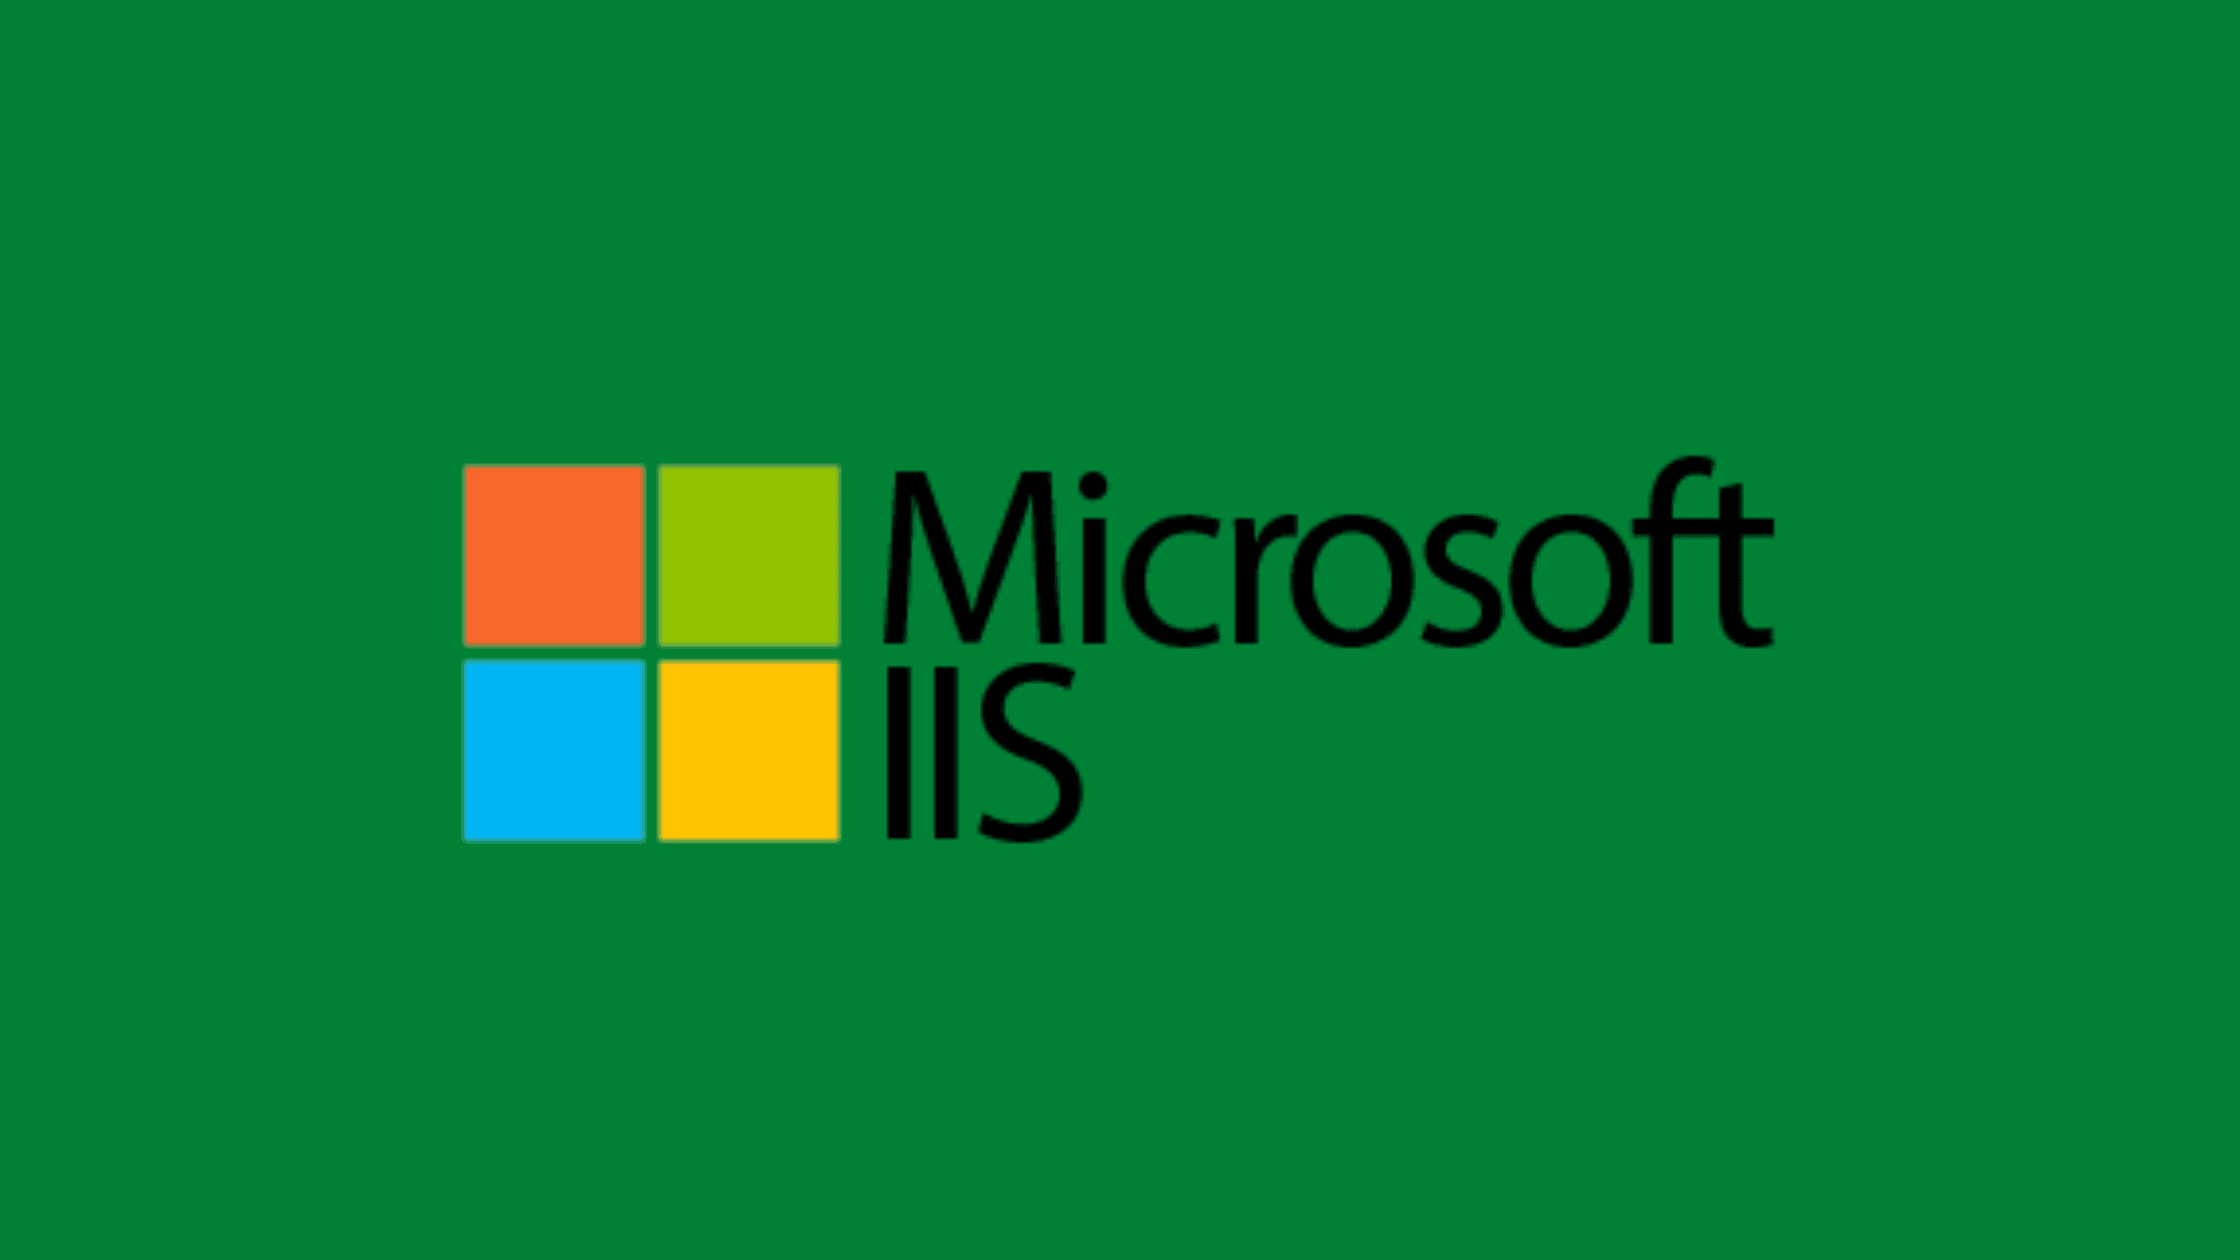 Step By Step Procedure To Configure Iis On The Windows Server